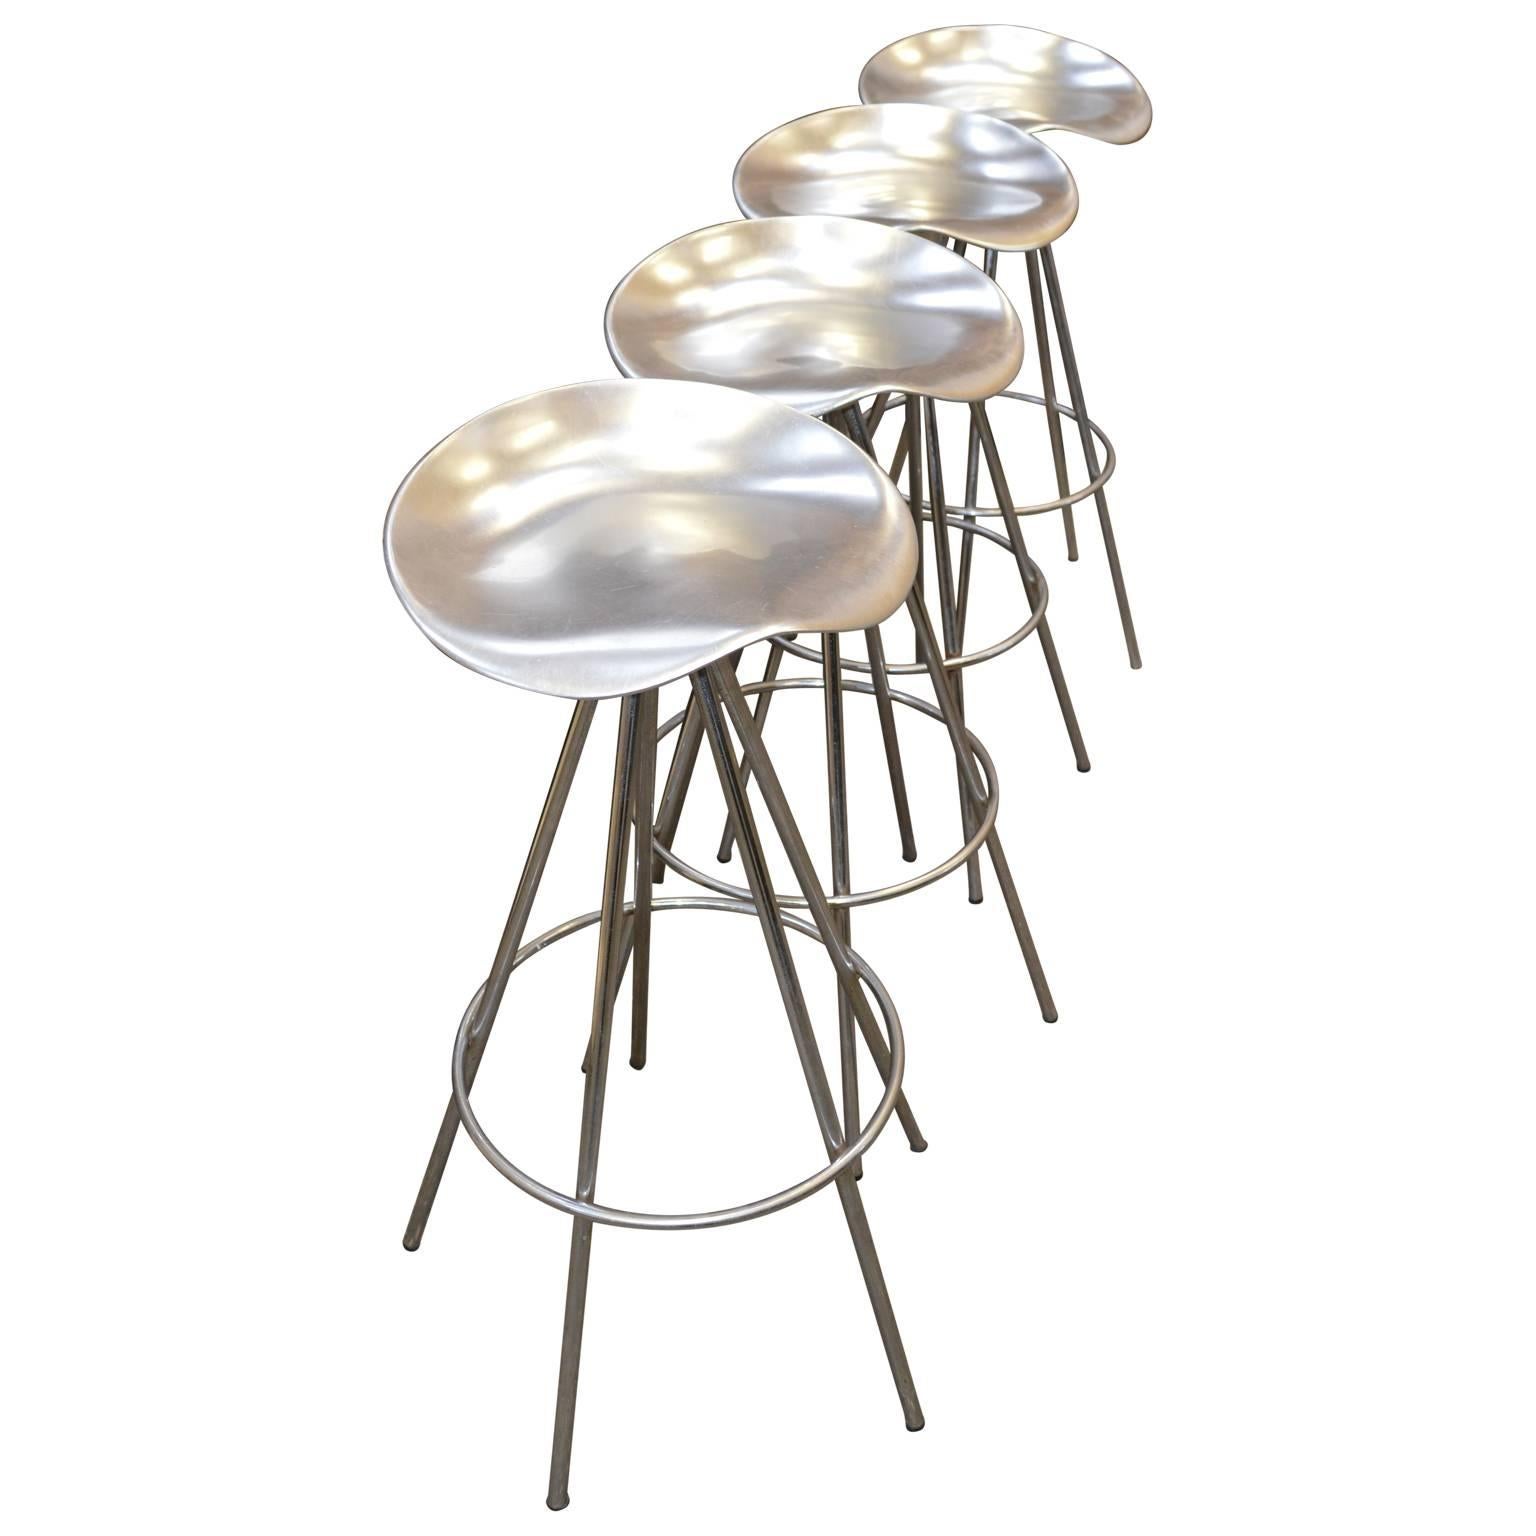 Four Chrome Jamaica Swivel Bar Stools by Pepe Cortes for Knoll 1